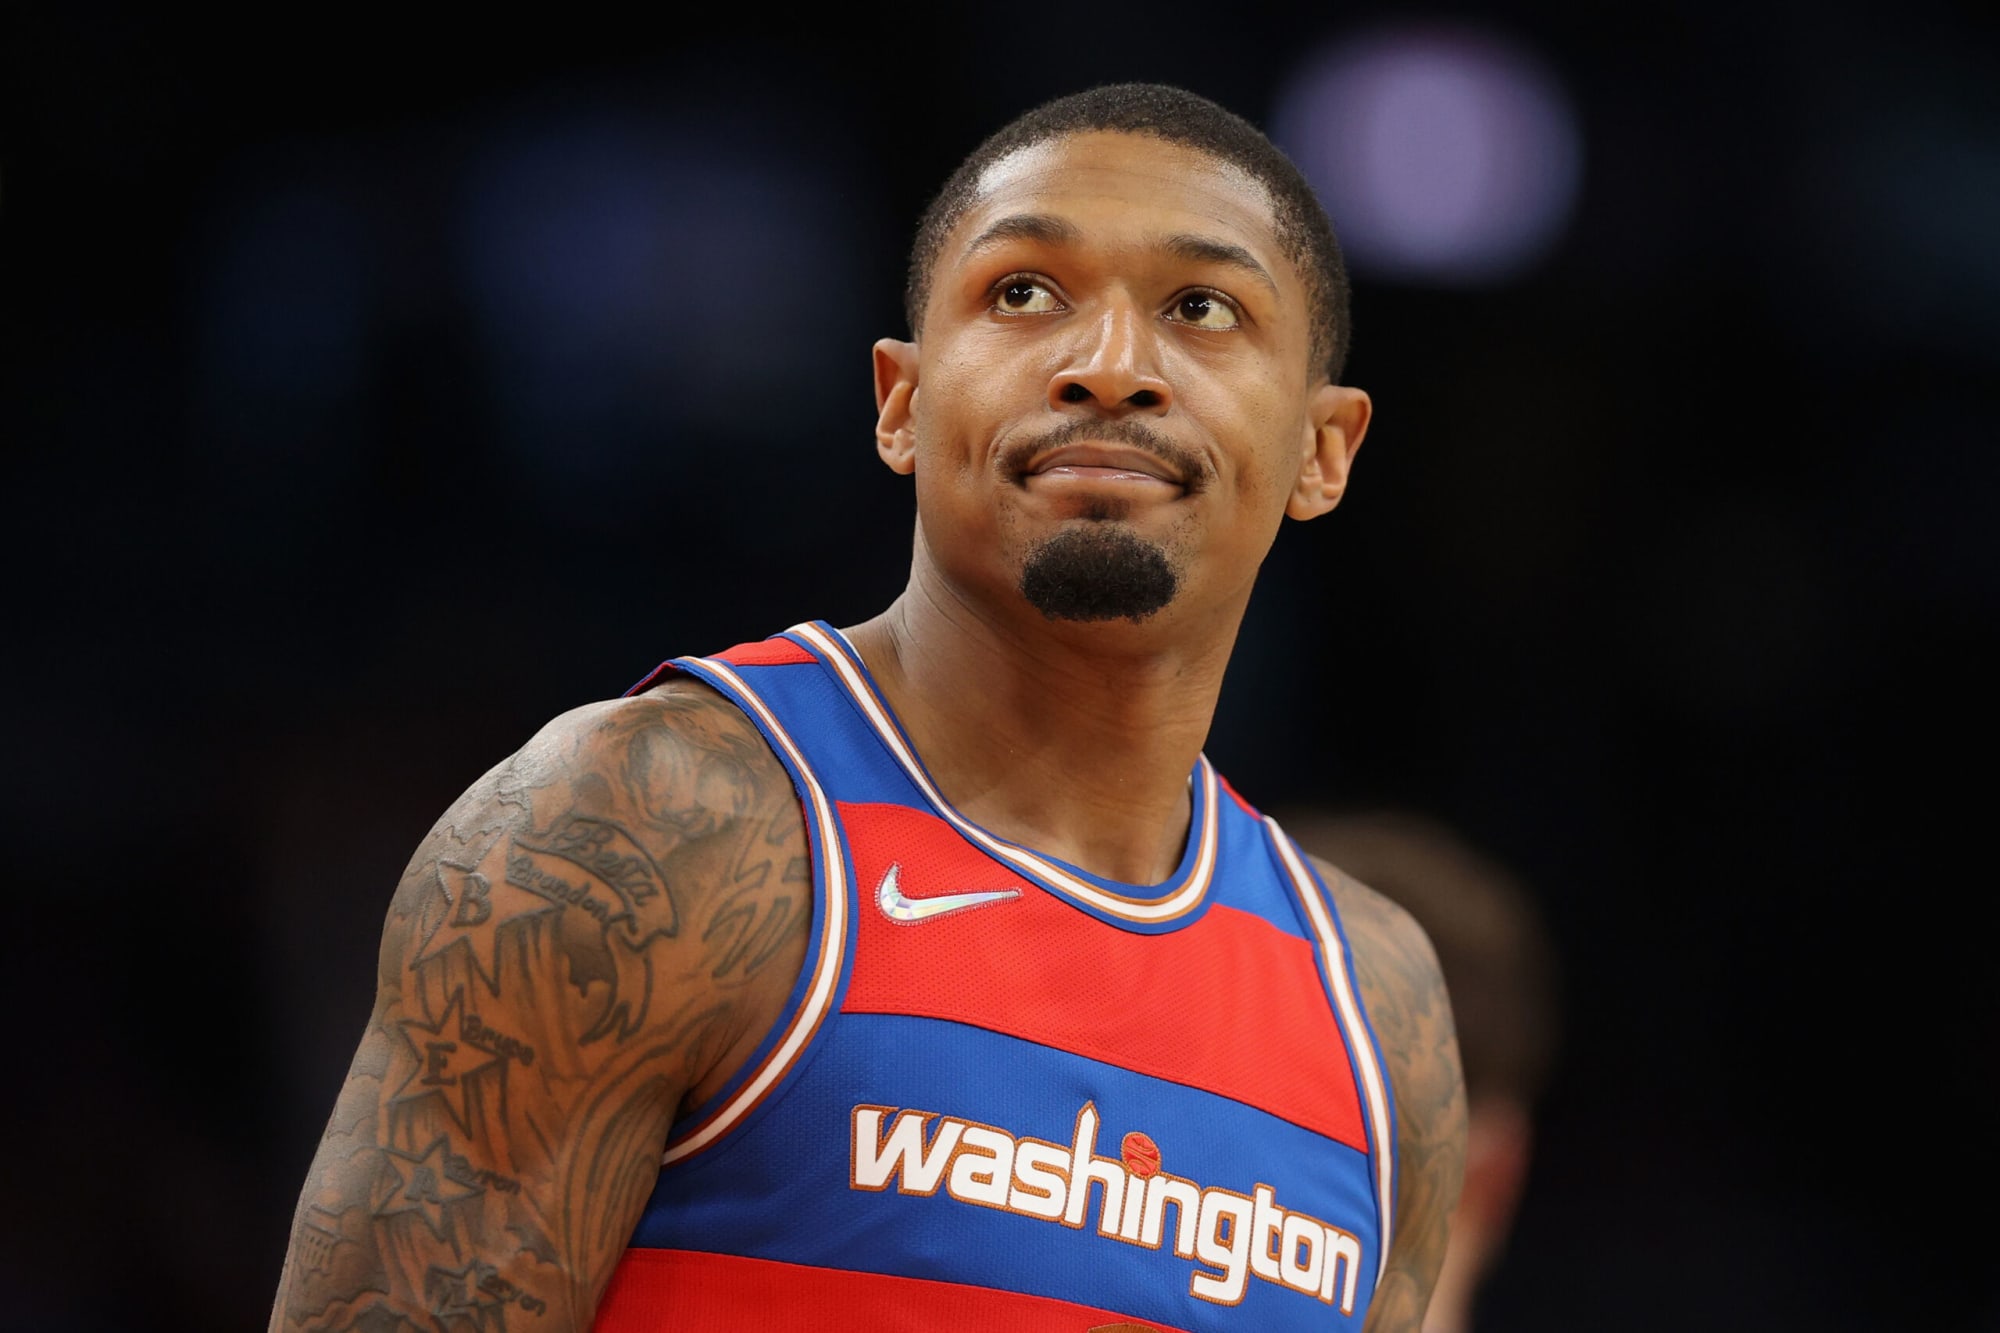 Bradley Beal trade details (updated): Suns acquire star, sending